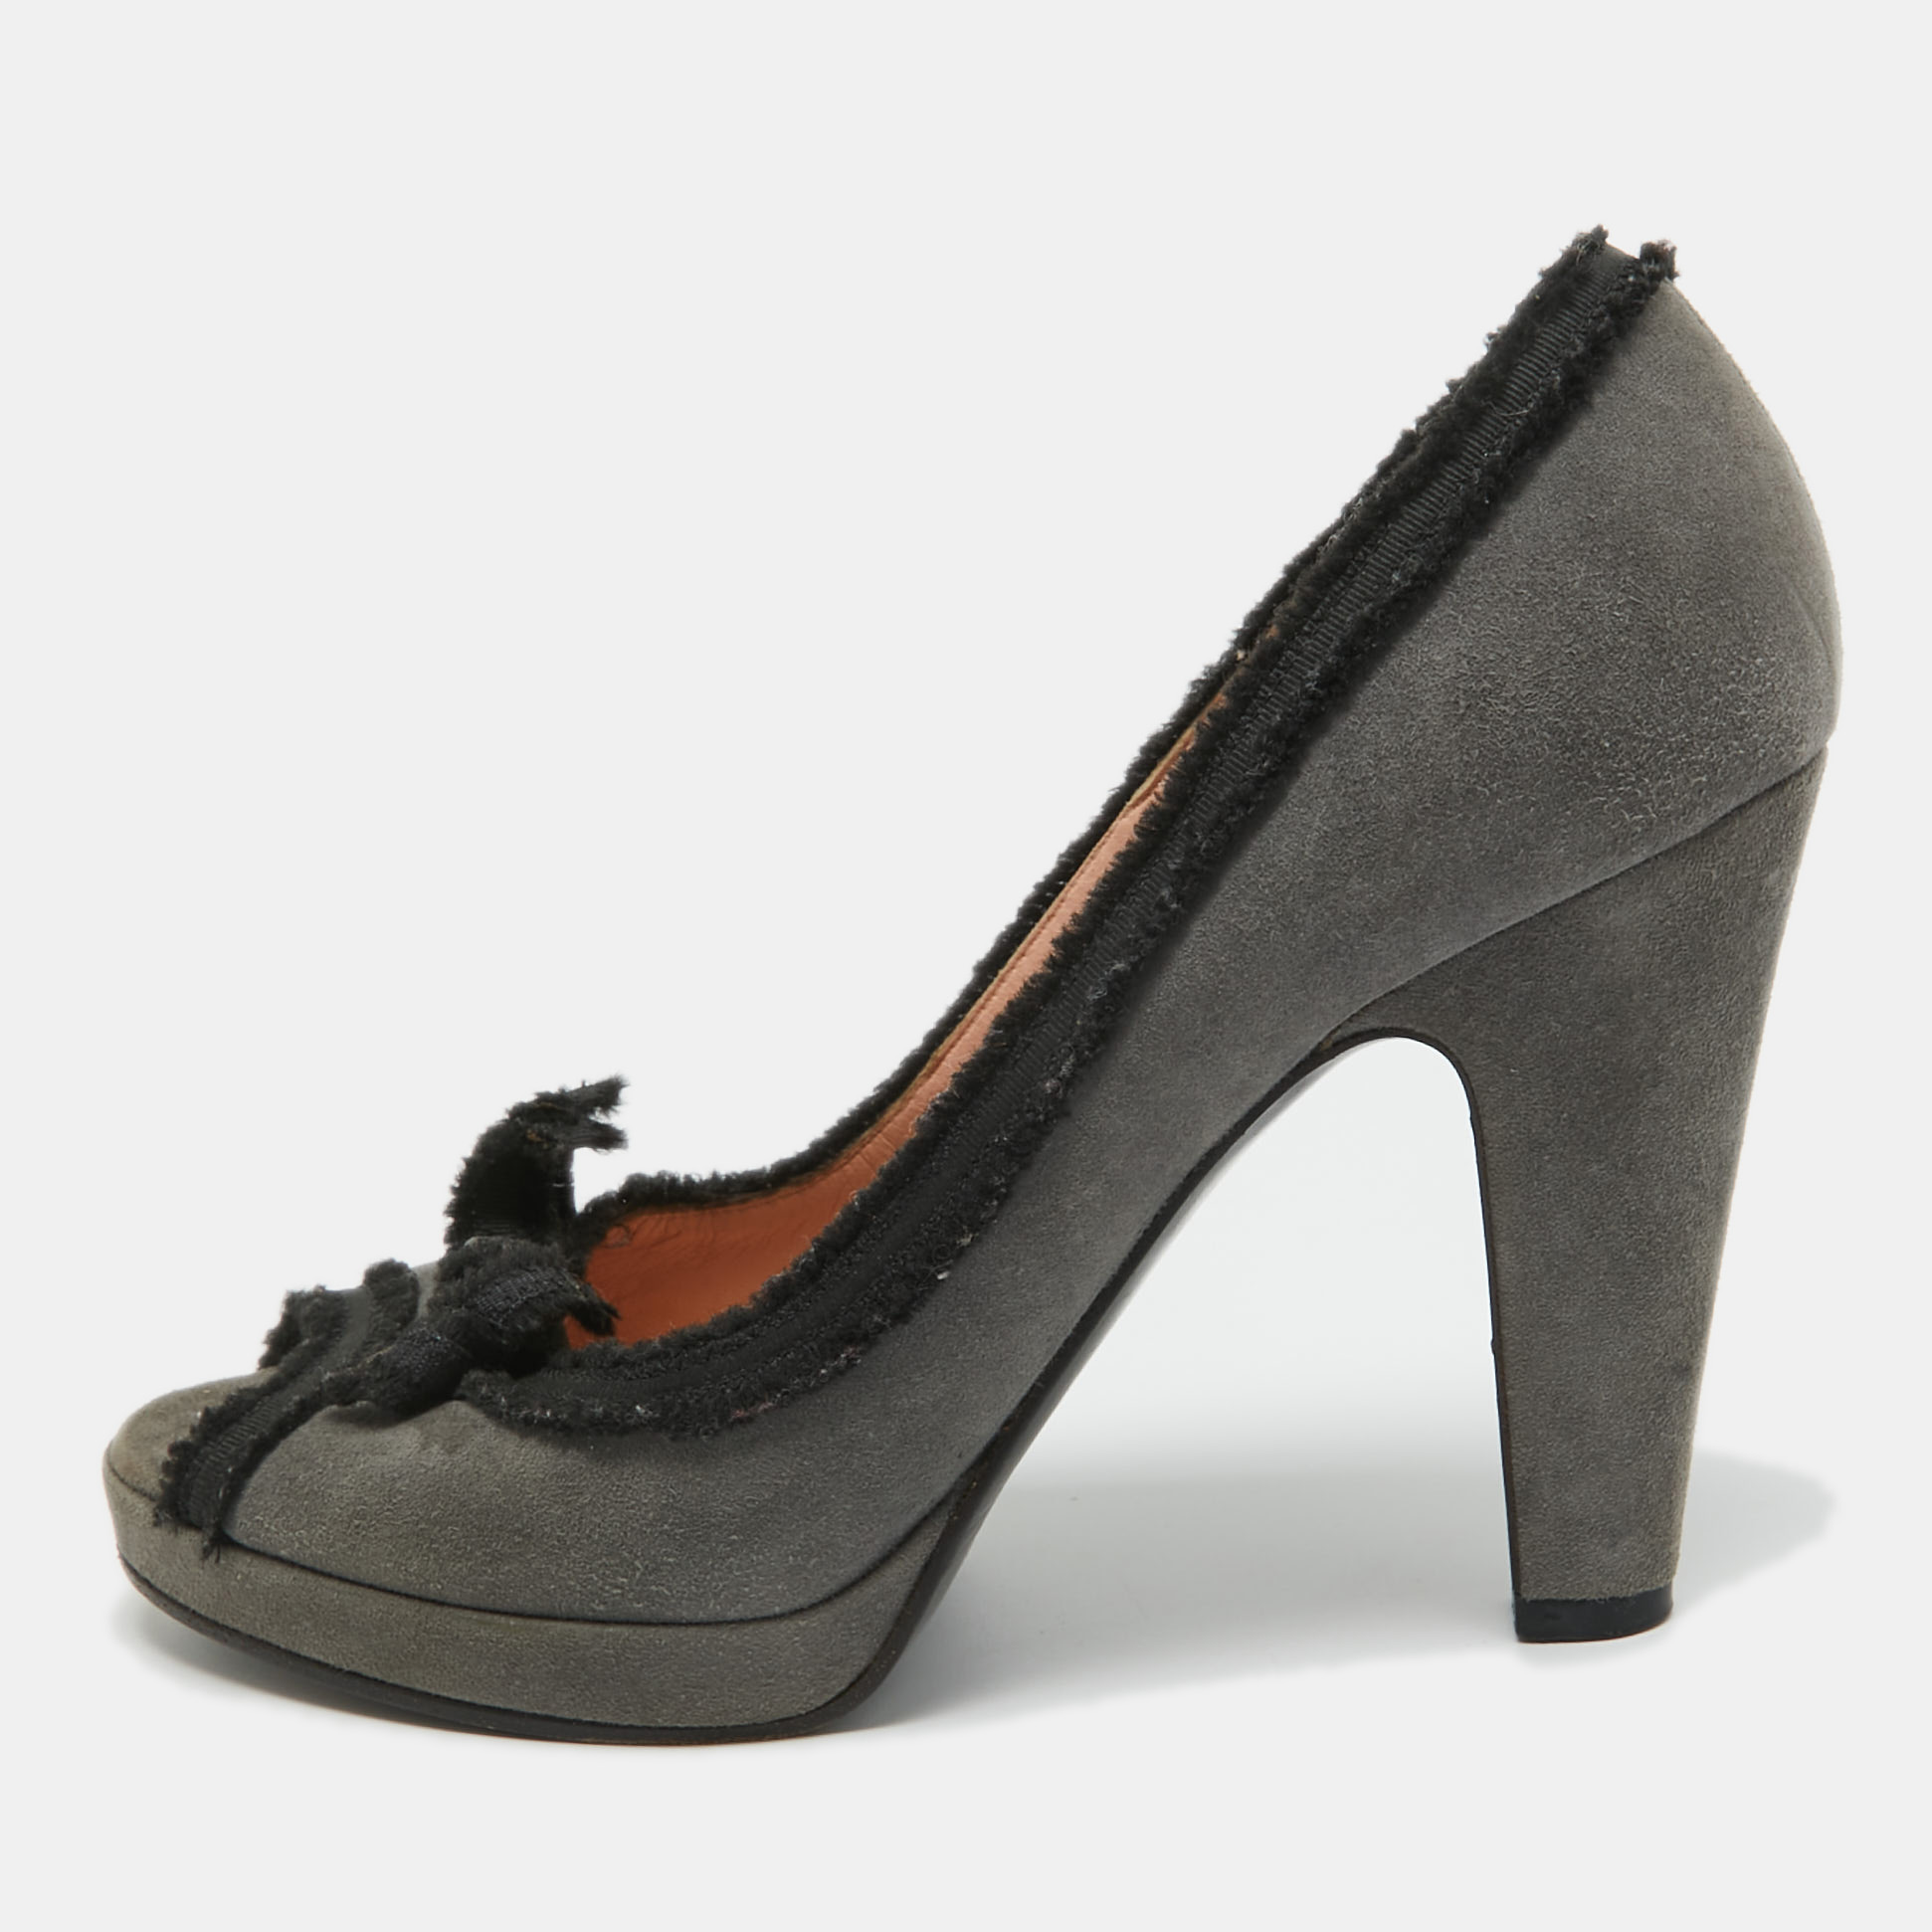 

Marc by Marc Jacobs Grey/Black Suede and Fabric Bow Peep Toe Platform Pumps Size